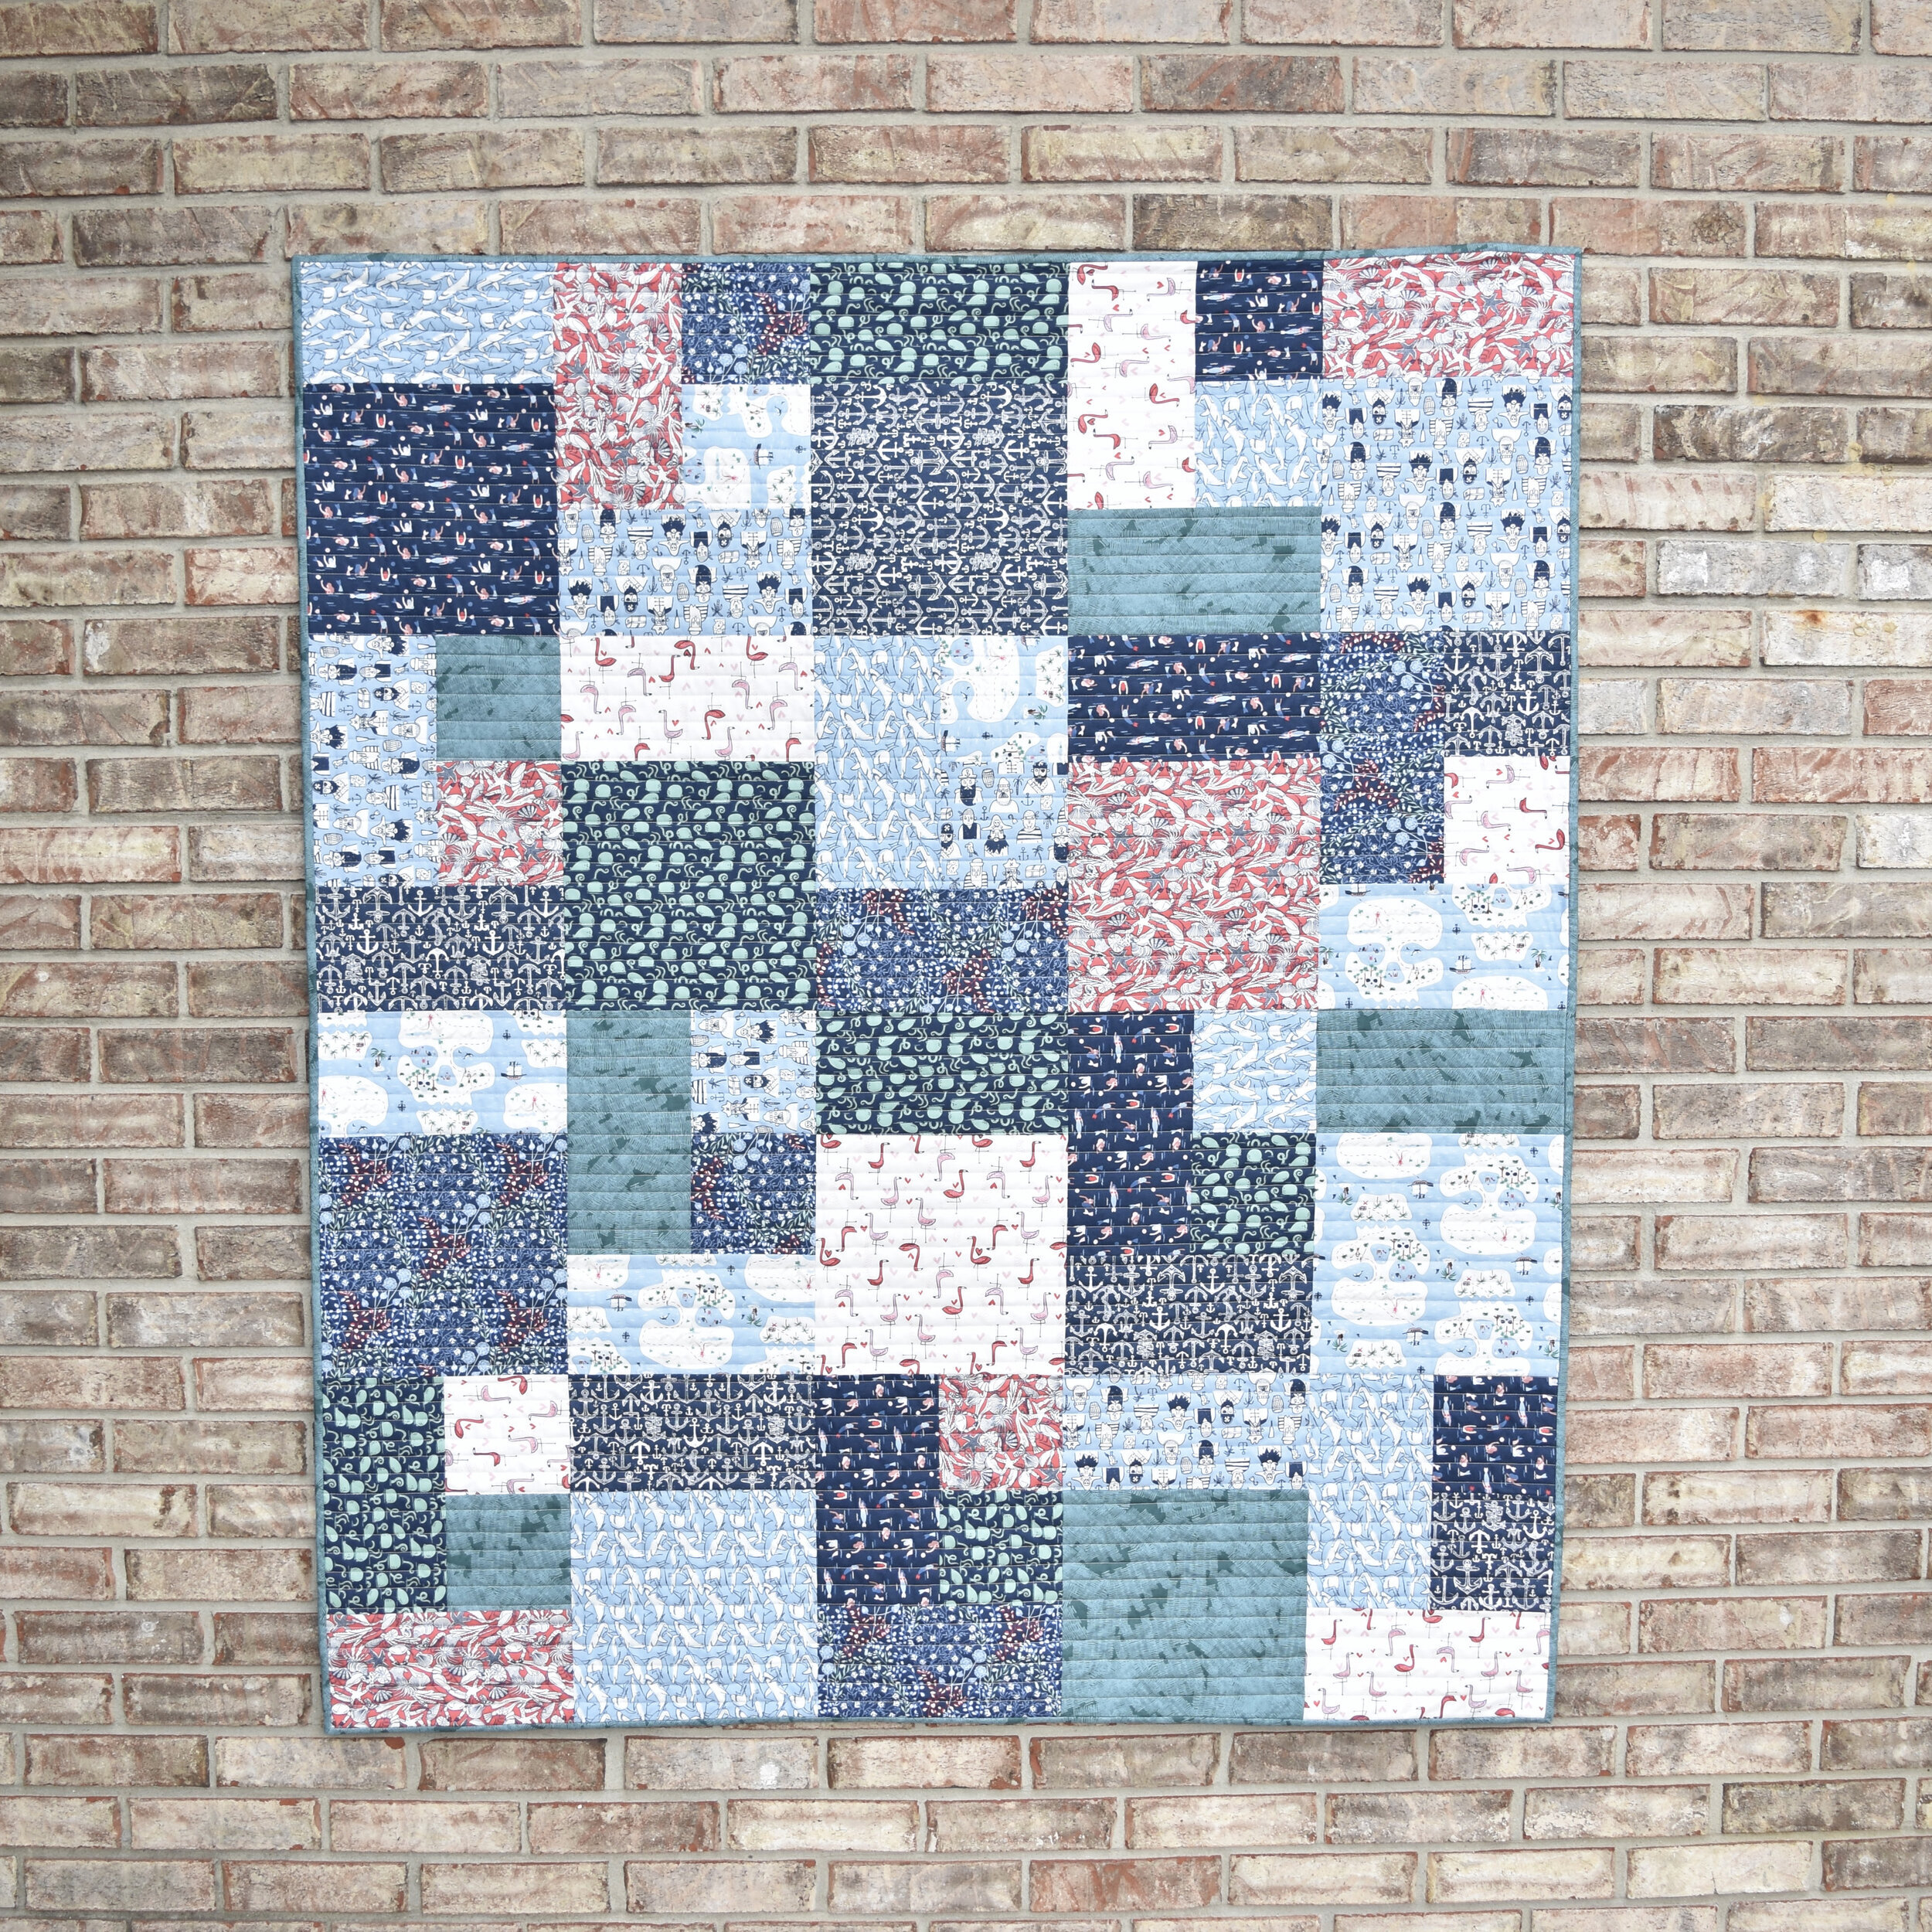 Fat Quarter Mixer {a FREE, quick, easy and beginner friendly quilt pattern!}  — Material Girl Quilts